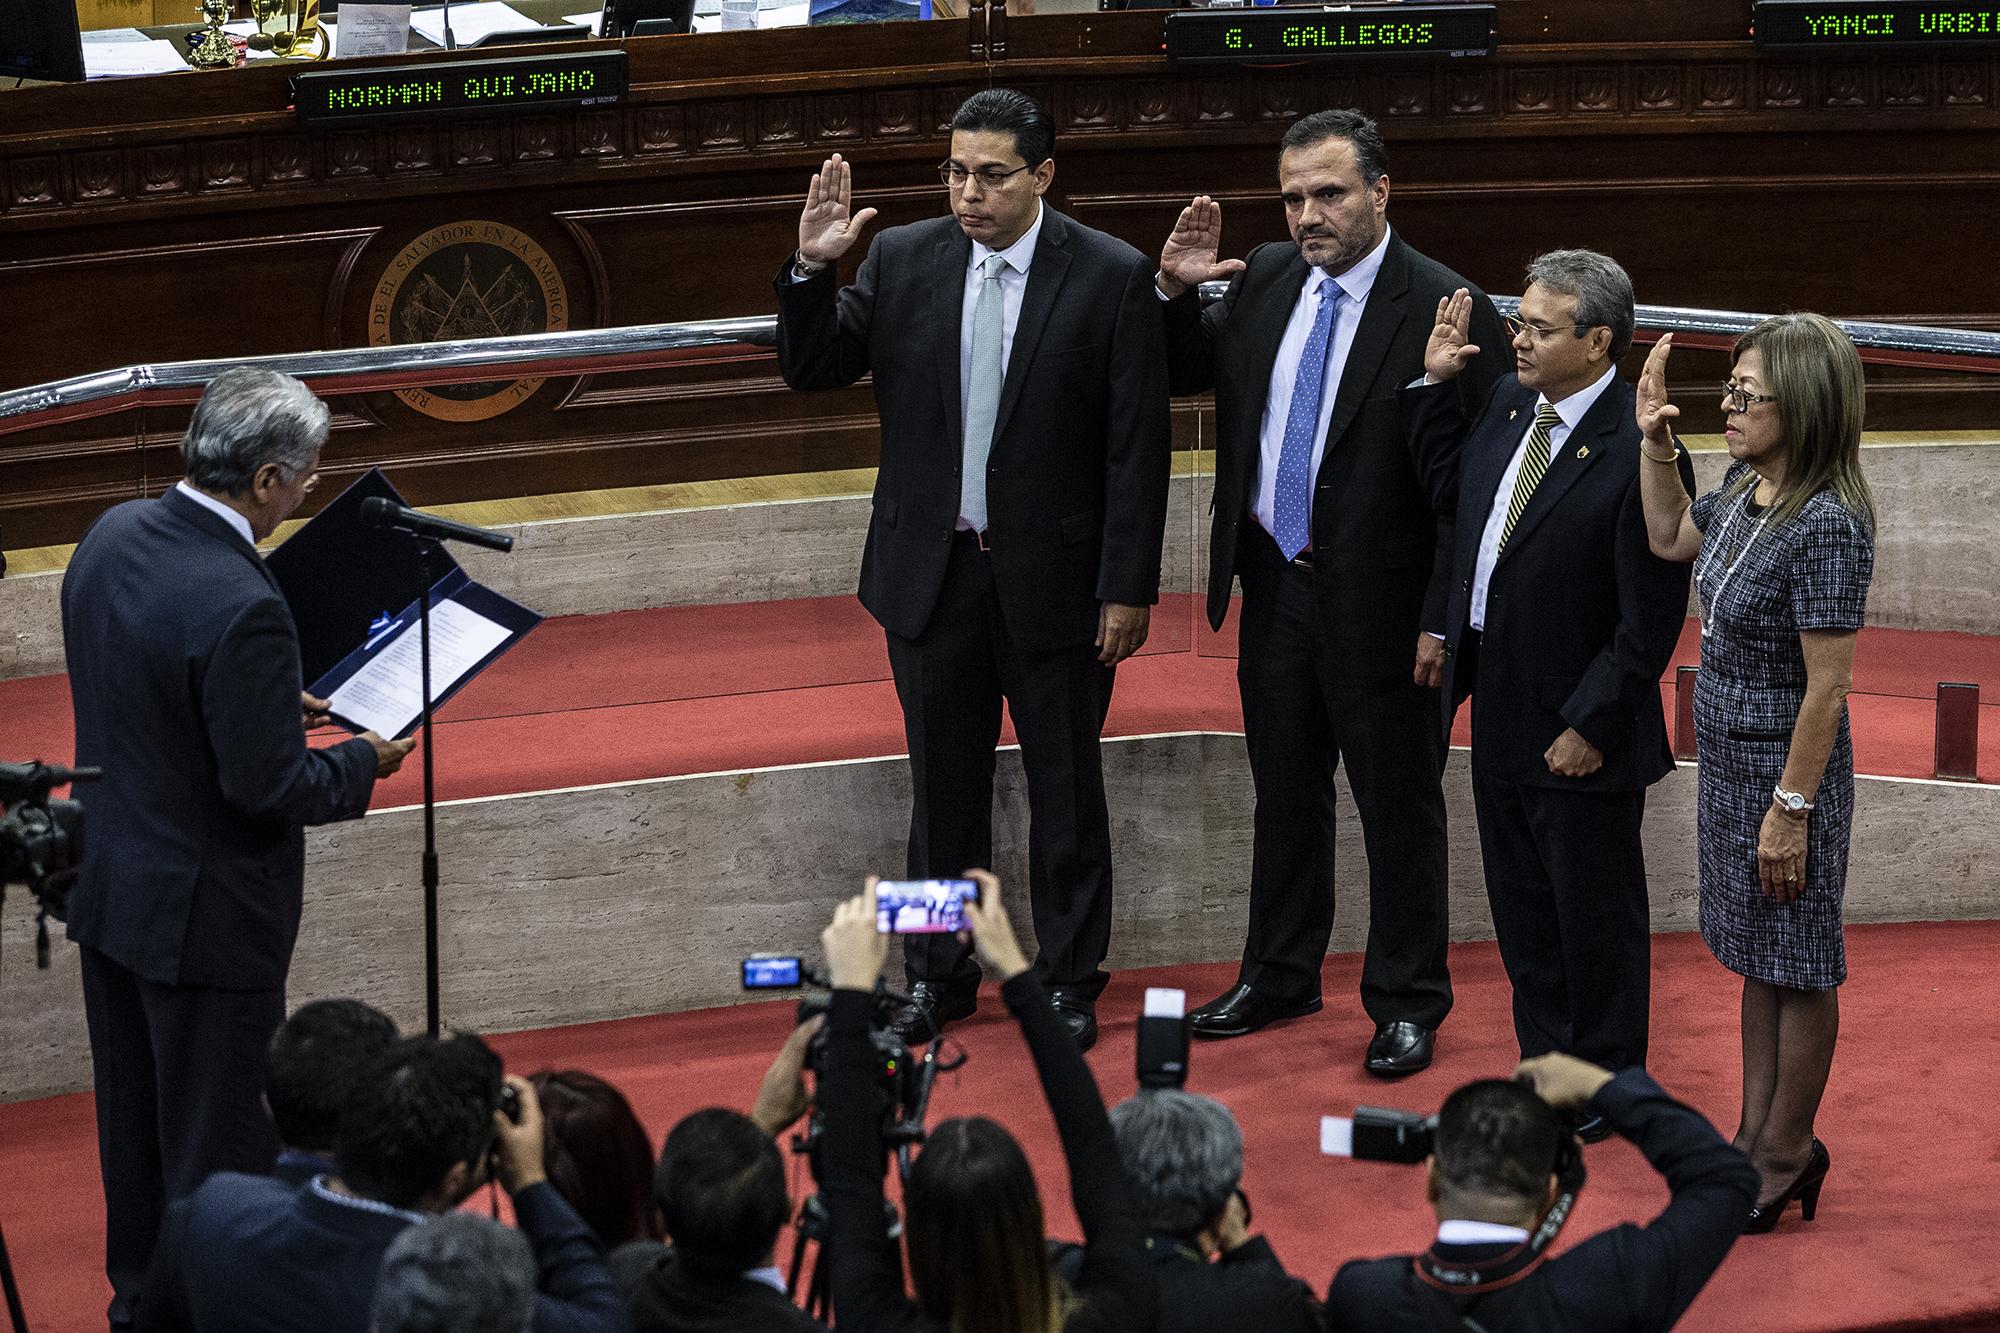 (From left to right) Aldo Cader, Carlos Sergio Avilés, Carlos Sánchez and Marina Marenco de Torrento, four of the five magistrates of the highest court of justice in El Salvador, at their swearing-in on Friday, November 16, 2018. Photo by Carlos Barrera/El Faro.